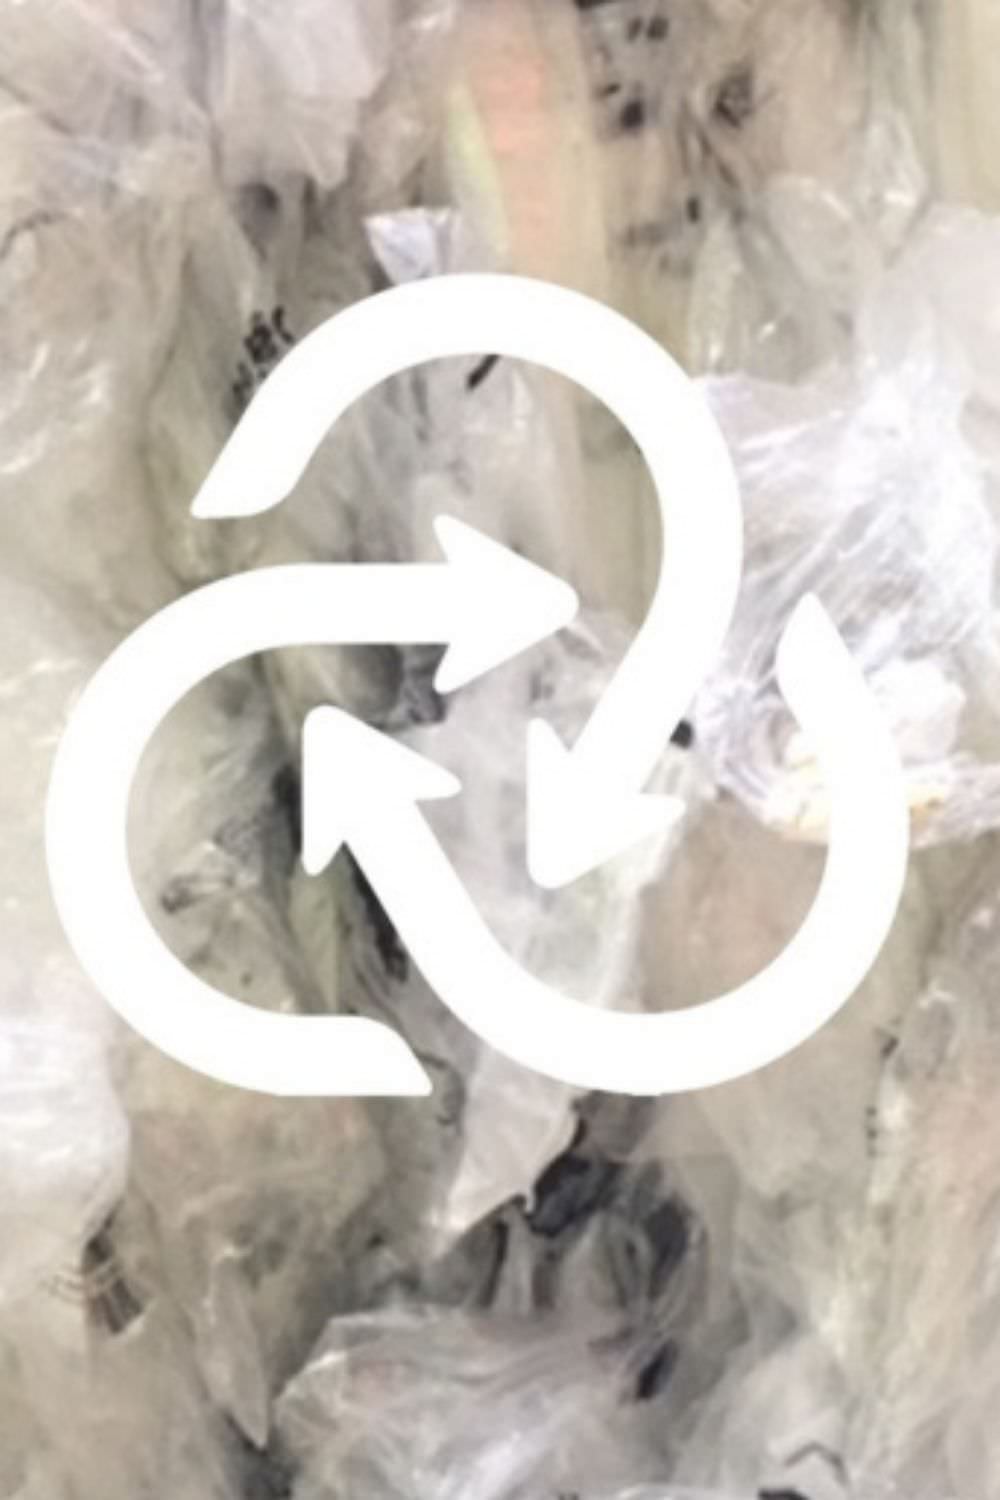 Closed Loop recycling logo on top of clear scrap